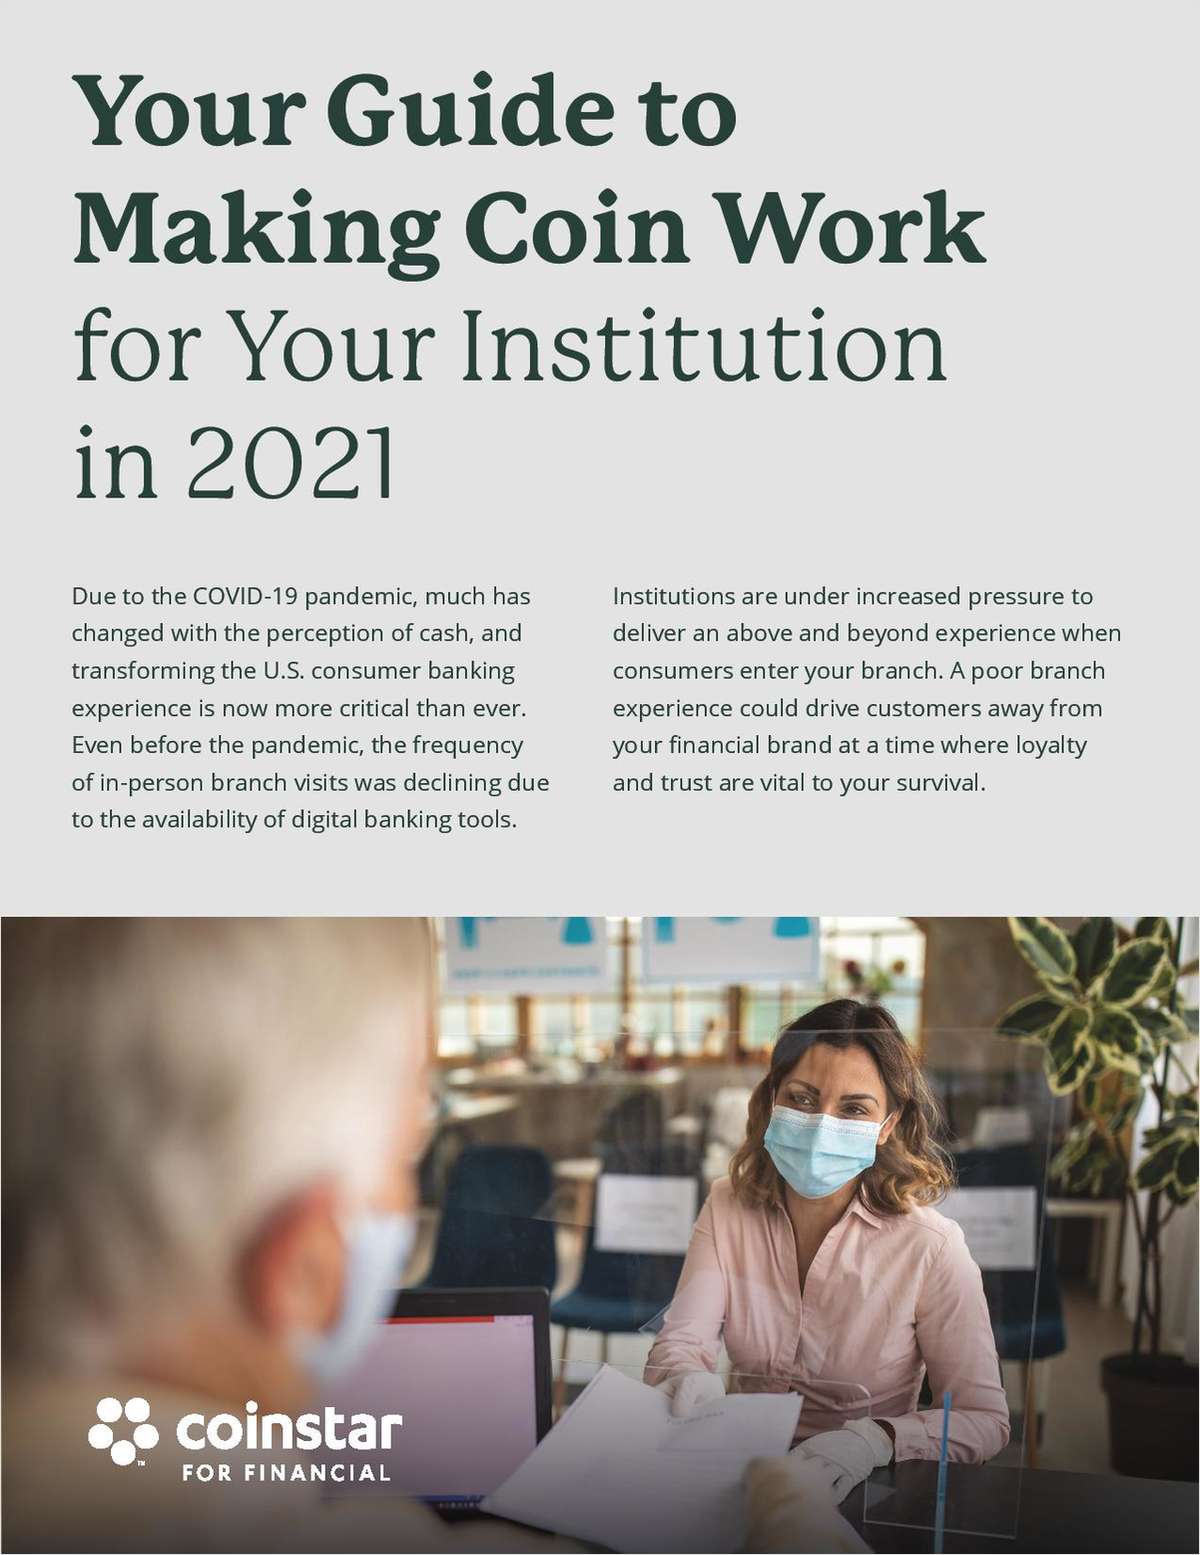 Your Guide to Making Coin Work for Your Institution in 2021